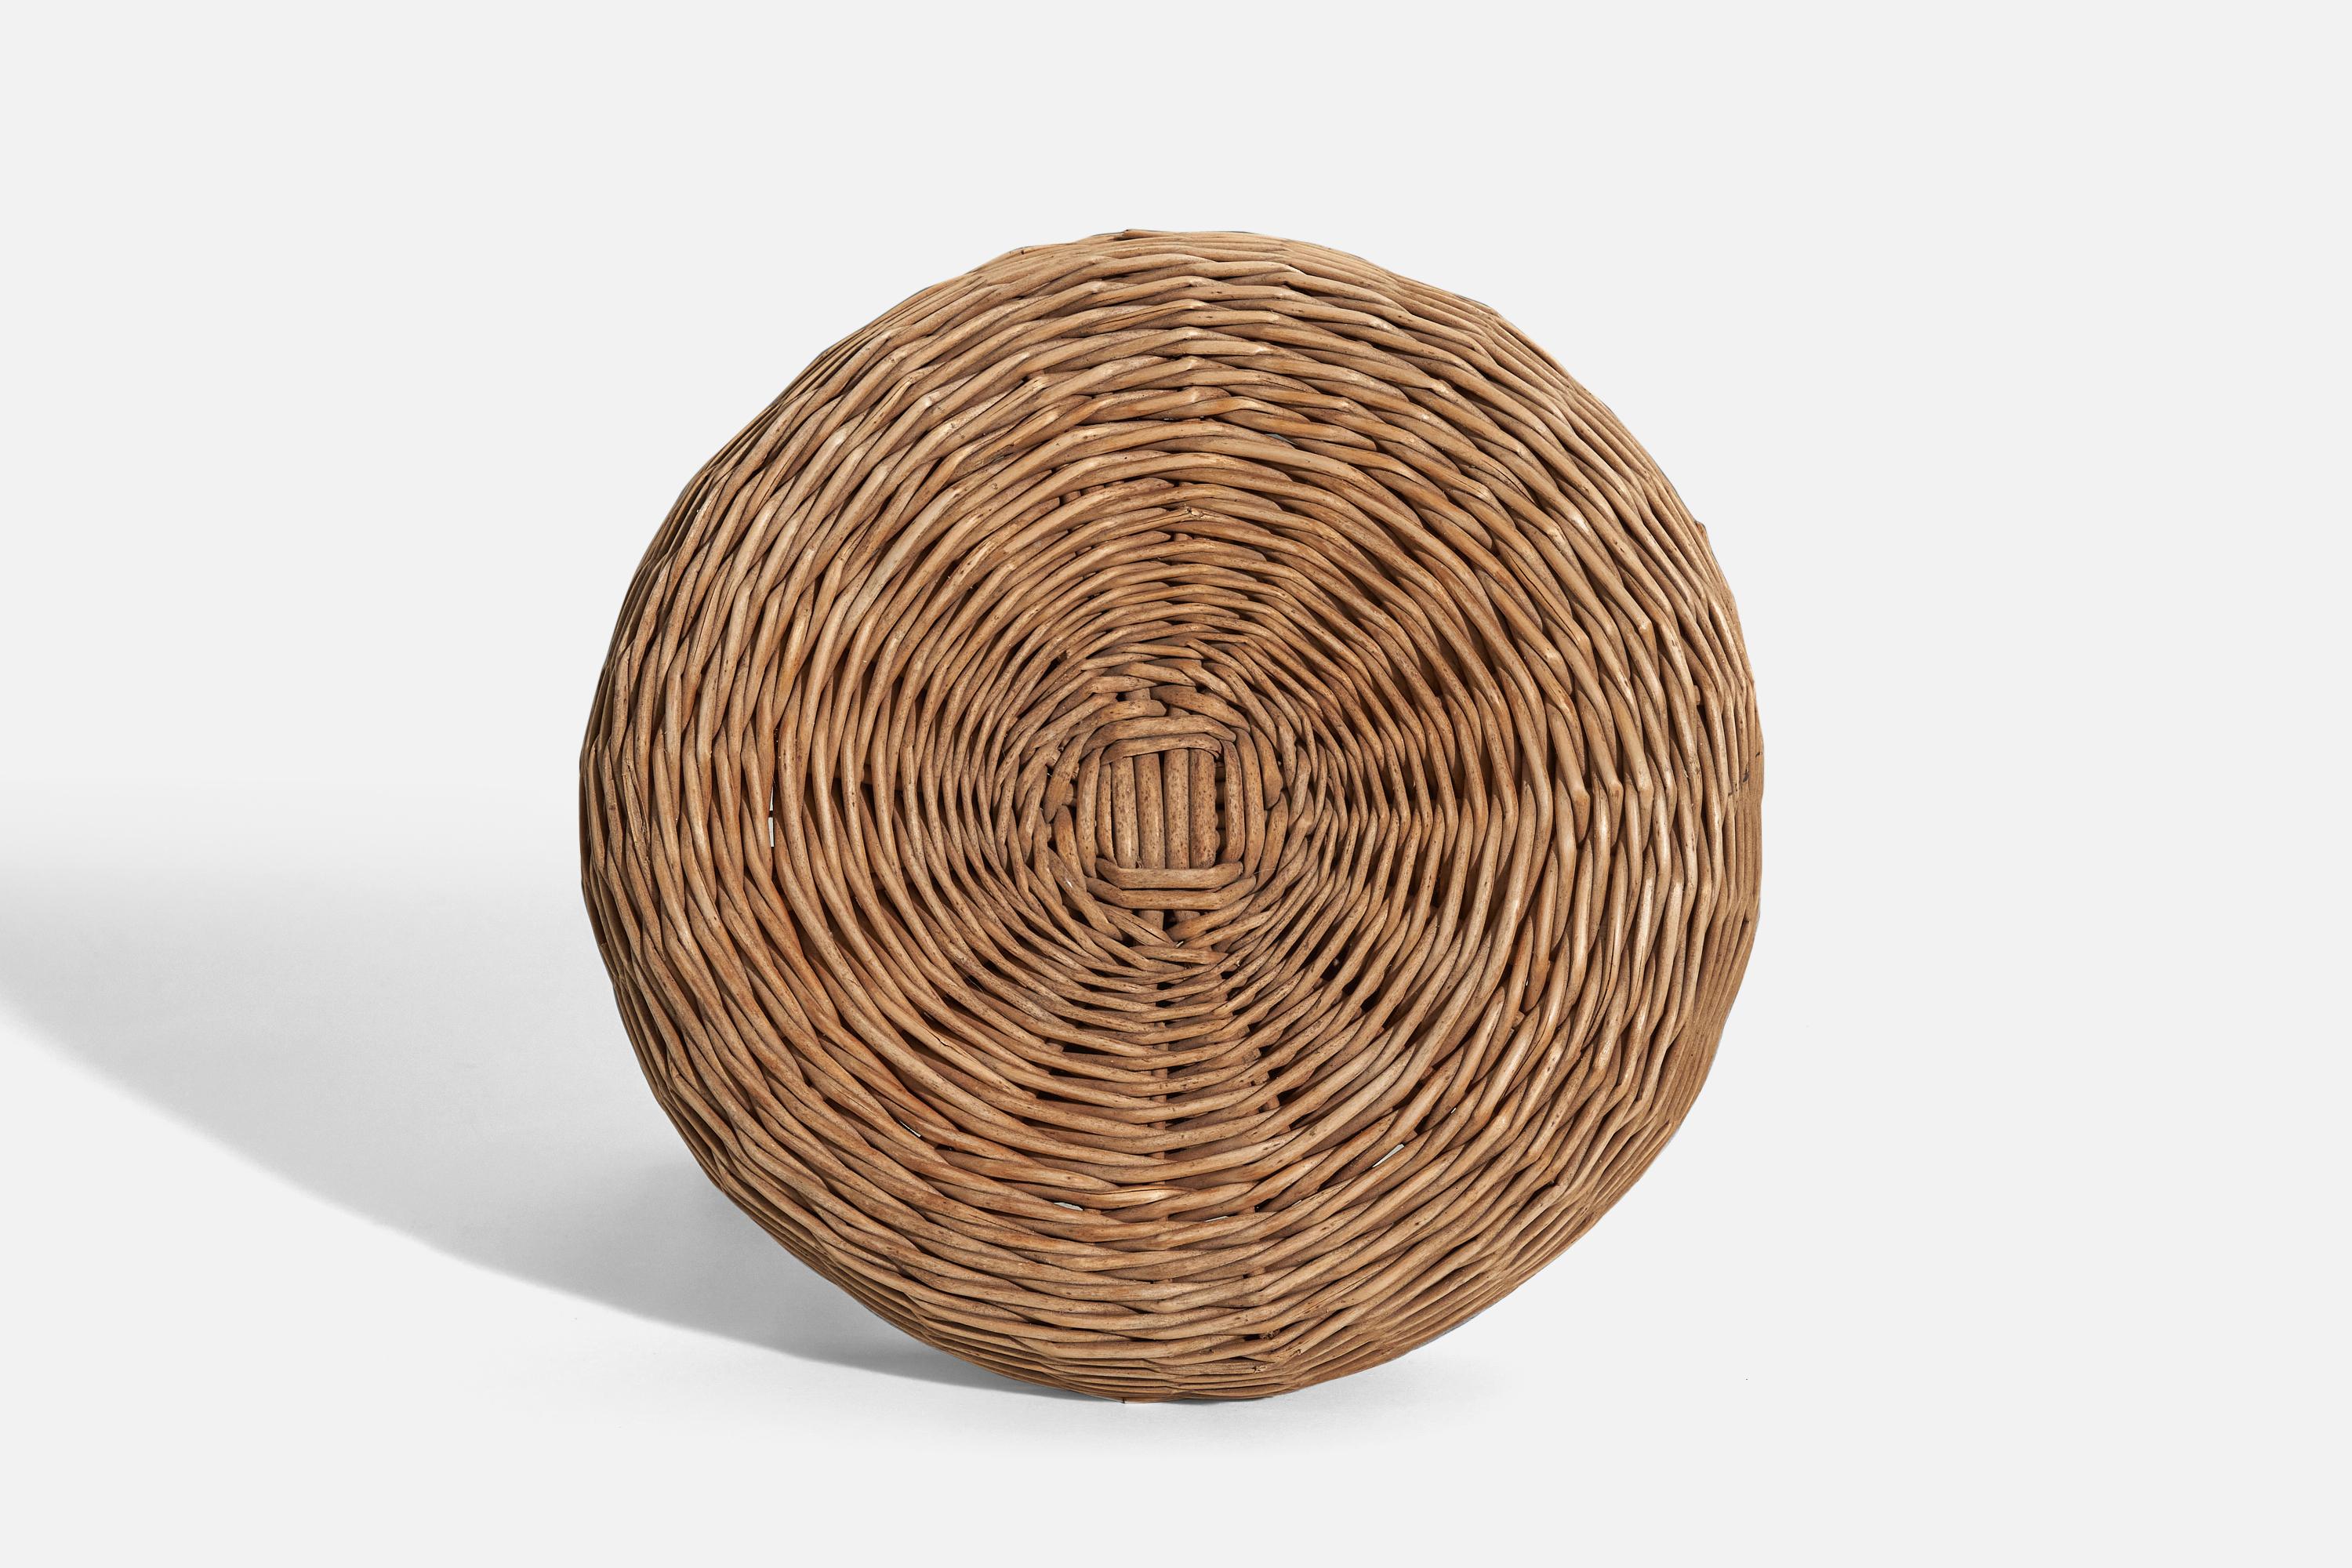 Mid-20th Century Tony Paul, “Attributed” Stool, Wicker, Wood, United States, 1950s For Sale